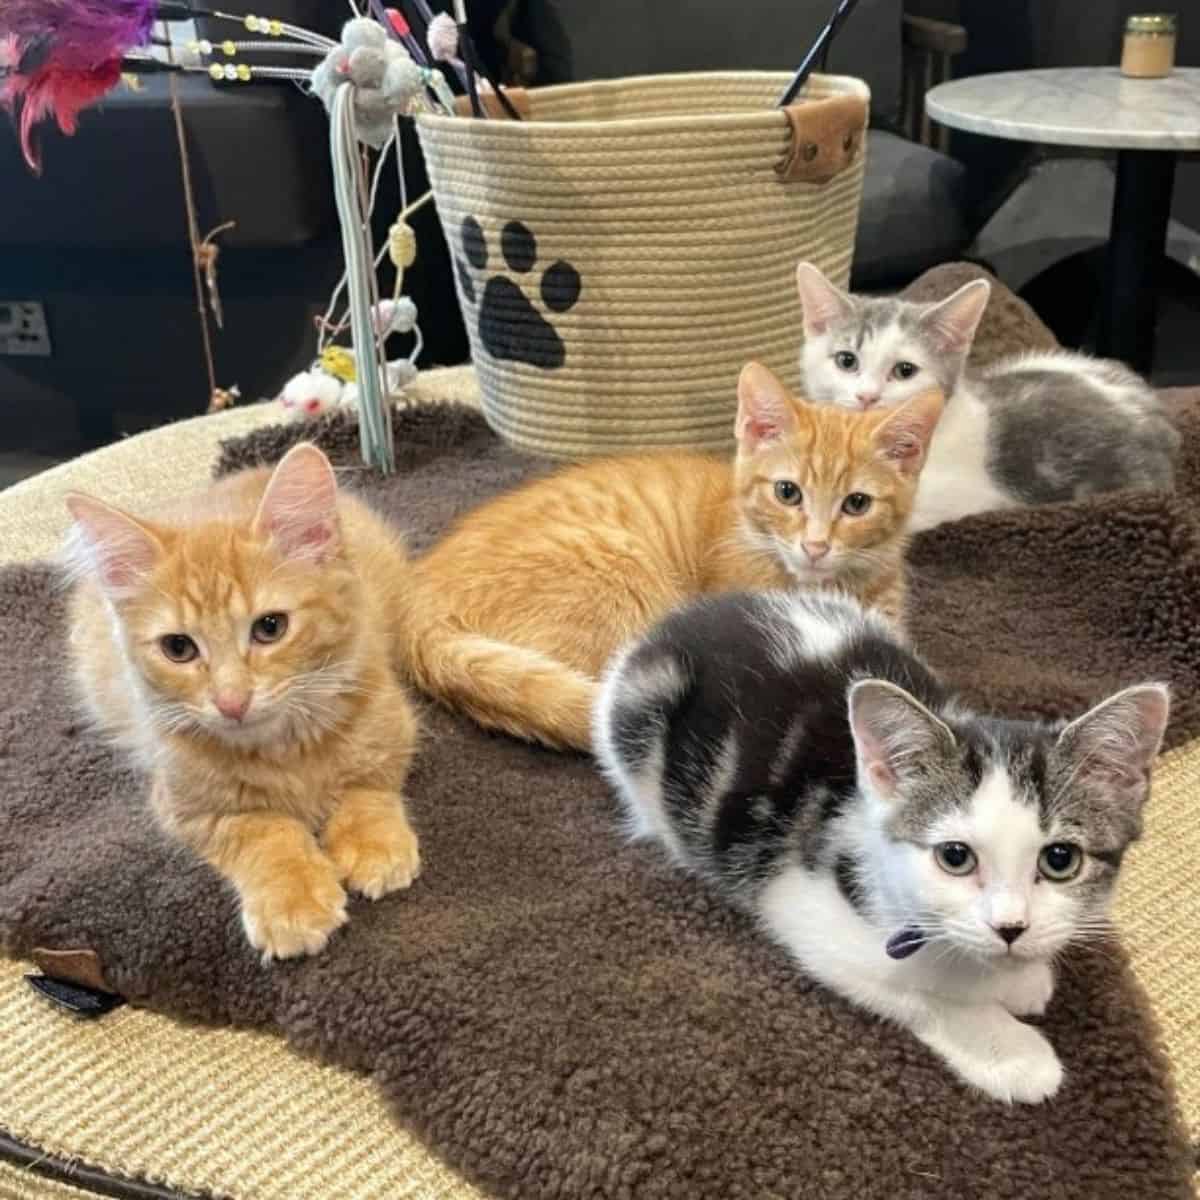 kittens on the table